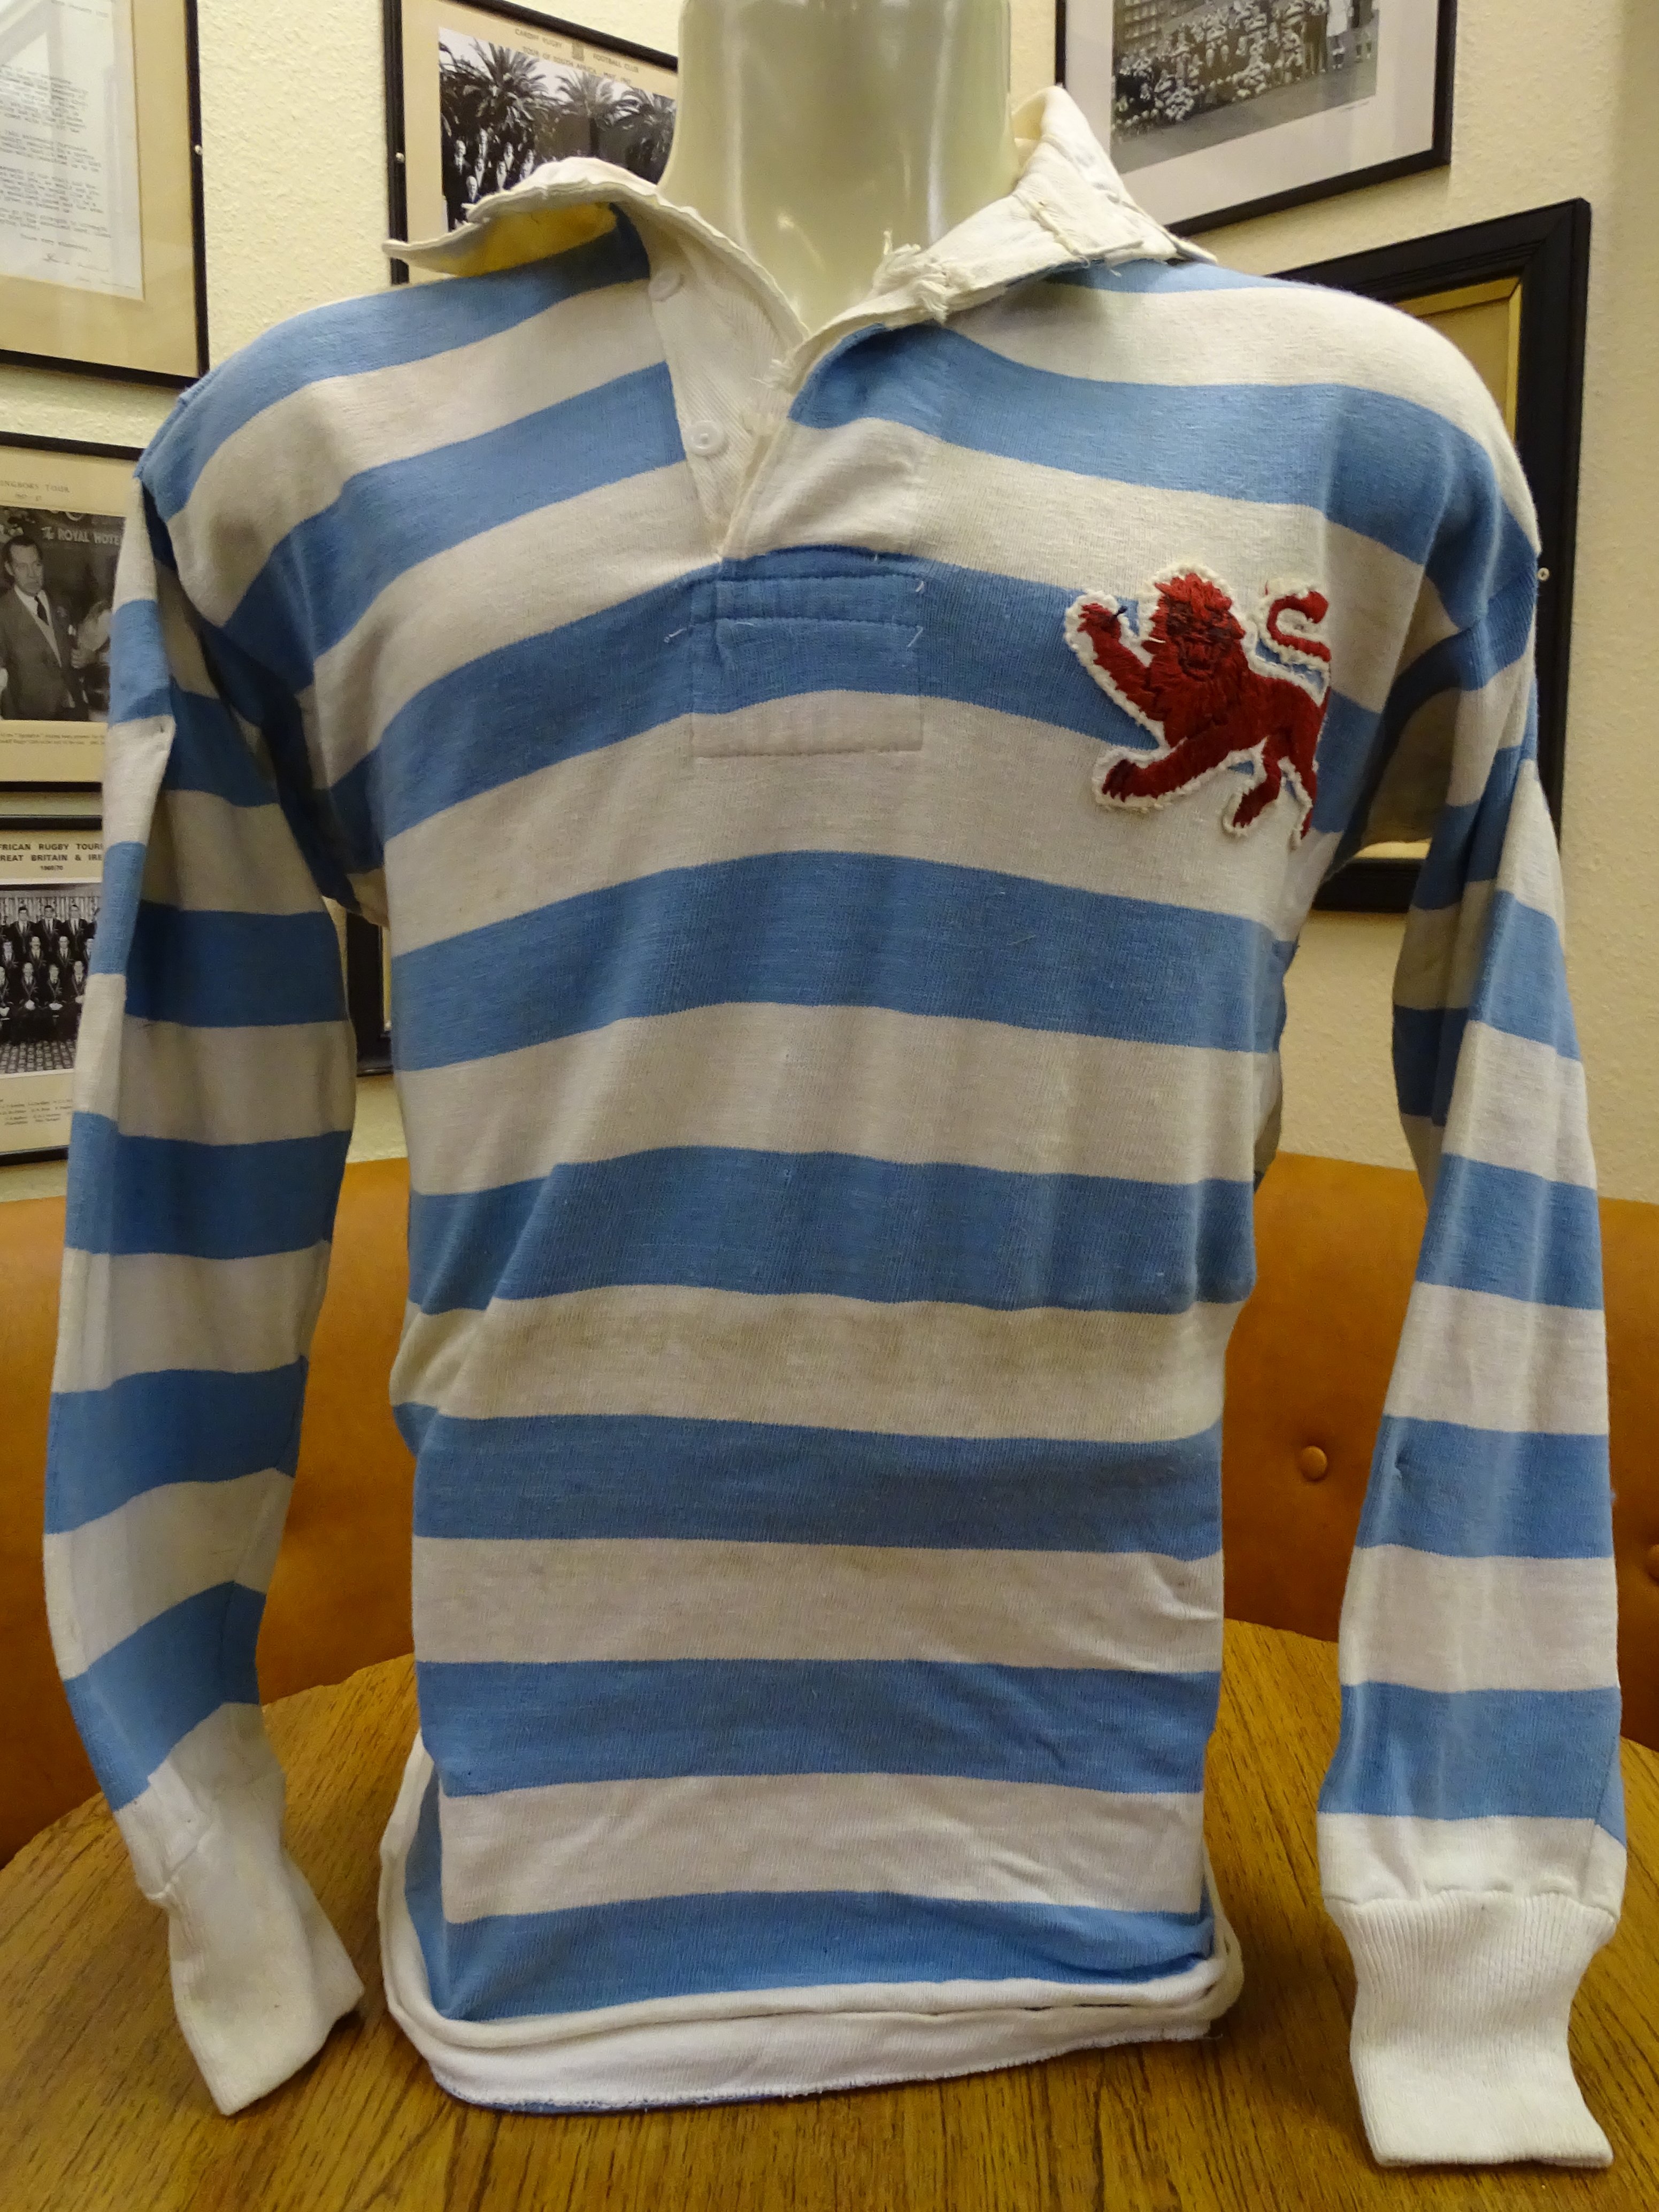 cambridge rugby jersey